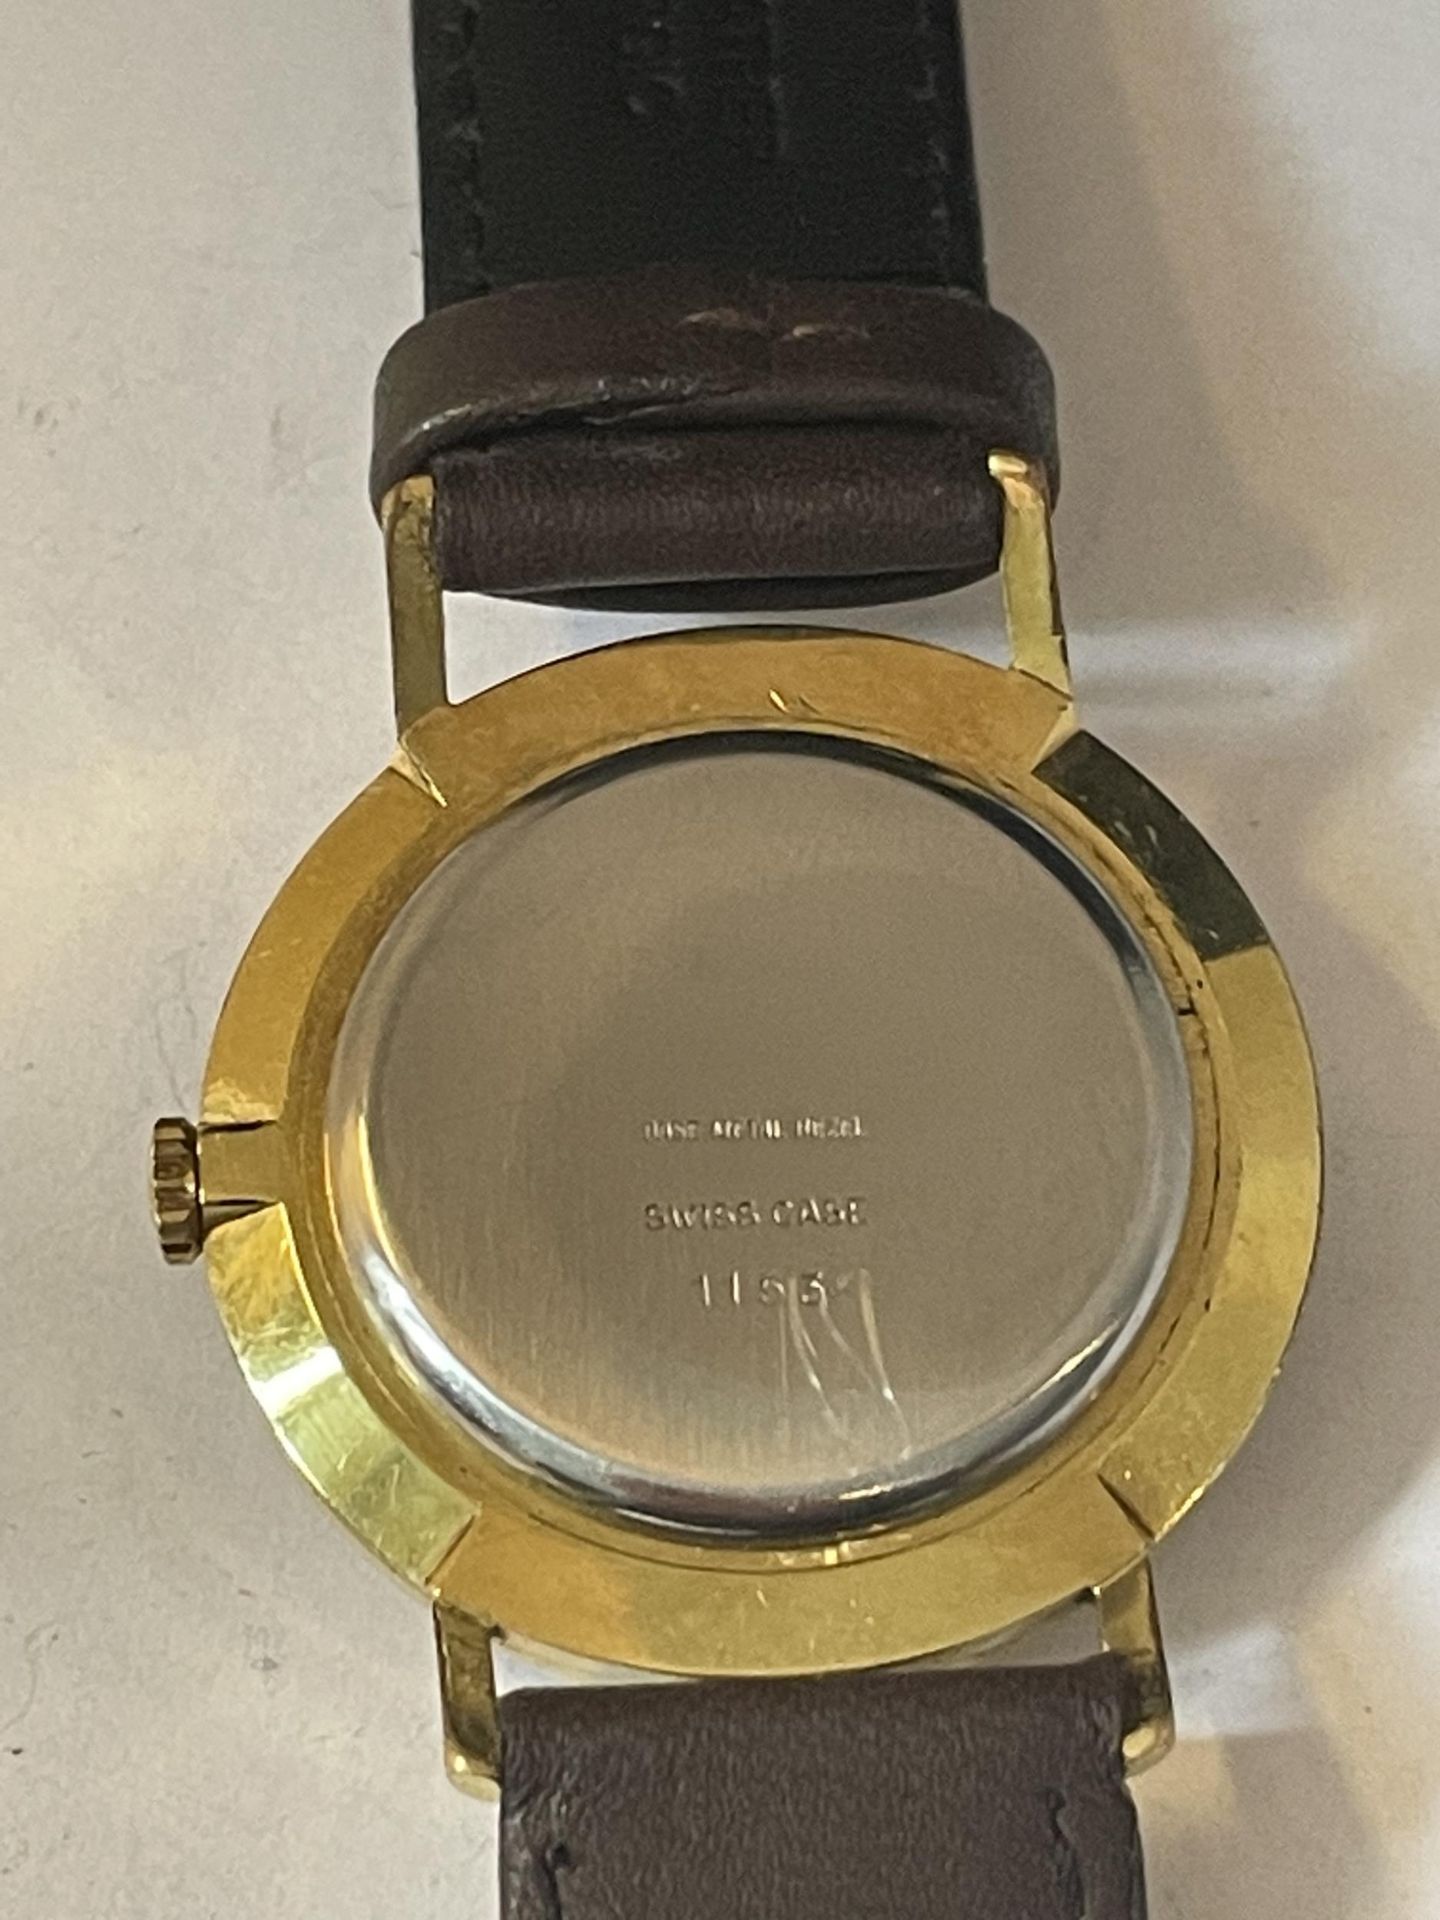 A GENTS TUDOR ROLEX ROYAL GOLD PLATED WRIST WATCH NOT IN ORIGINAL PRESENTATION BOX SEEN WORKING - Image 3 of 4